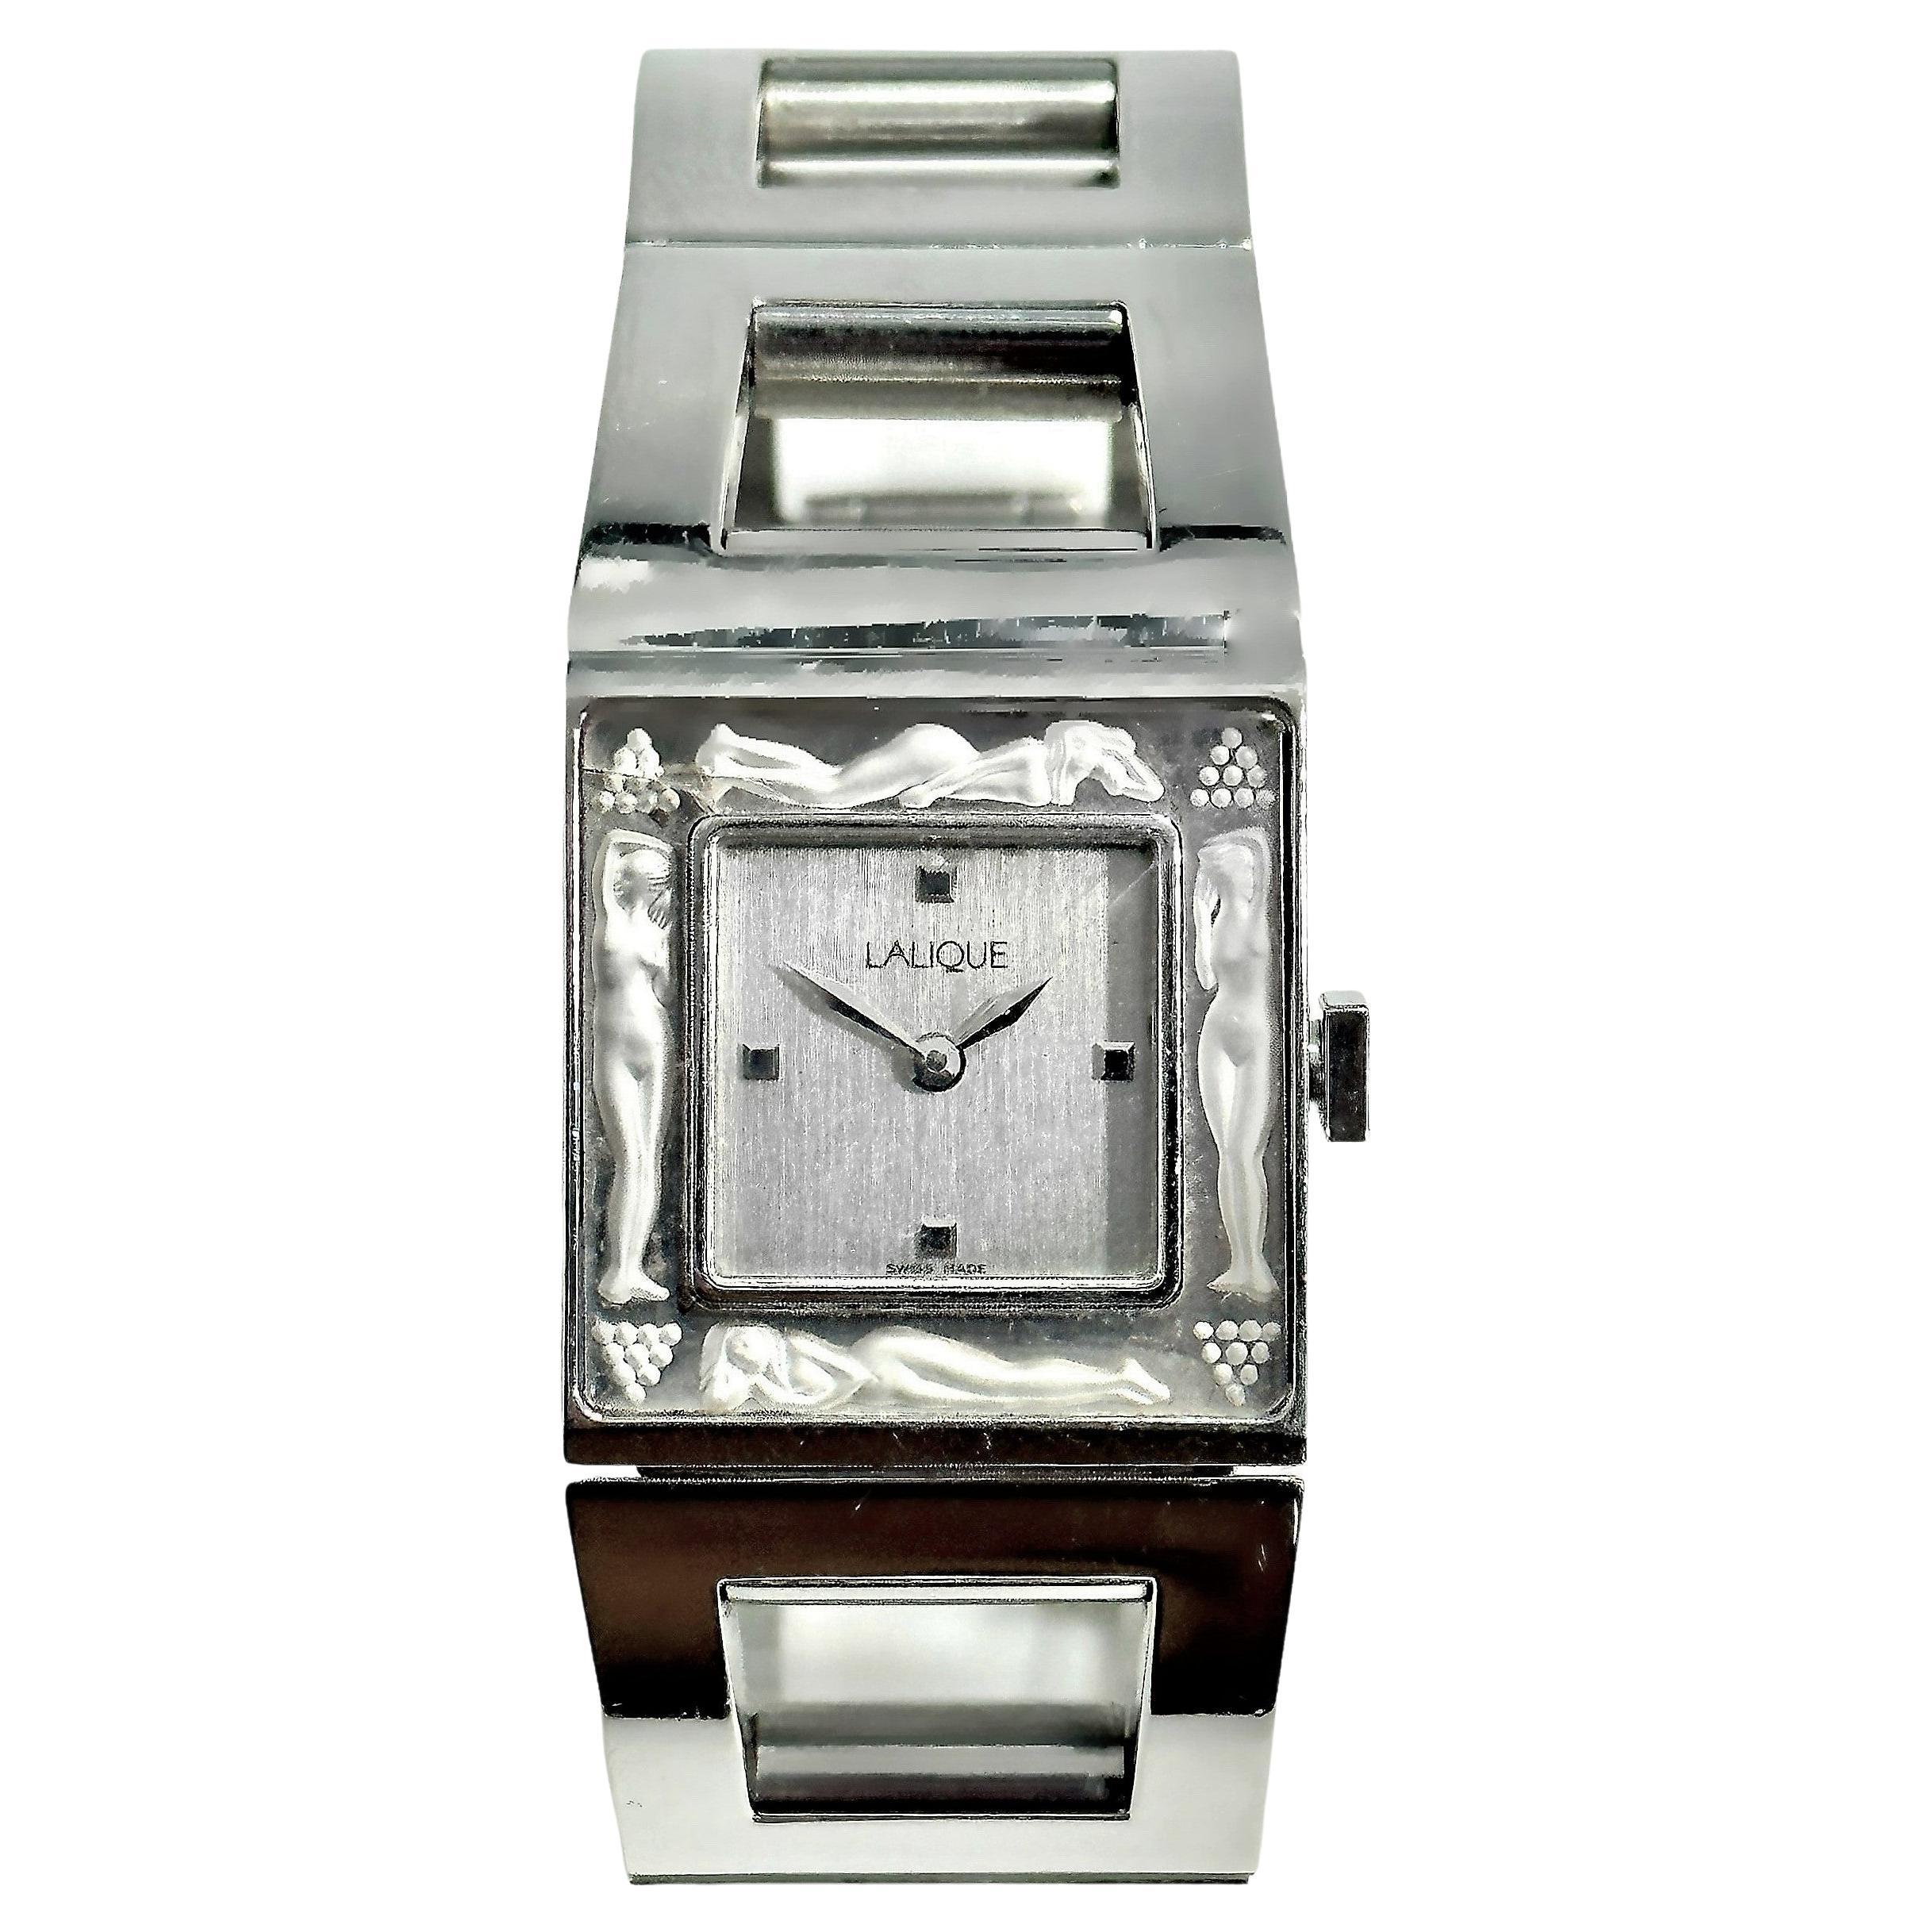 Lalique Stainless Steel Wristwatch with Carved Crystal Bezel